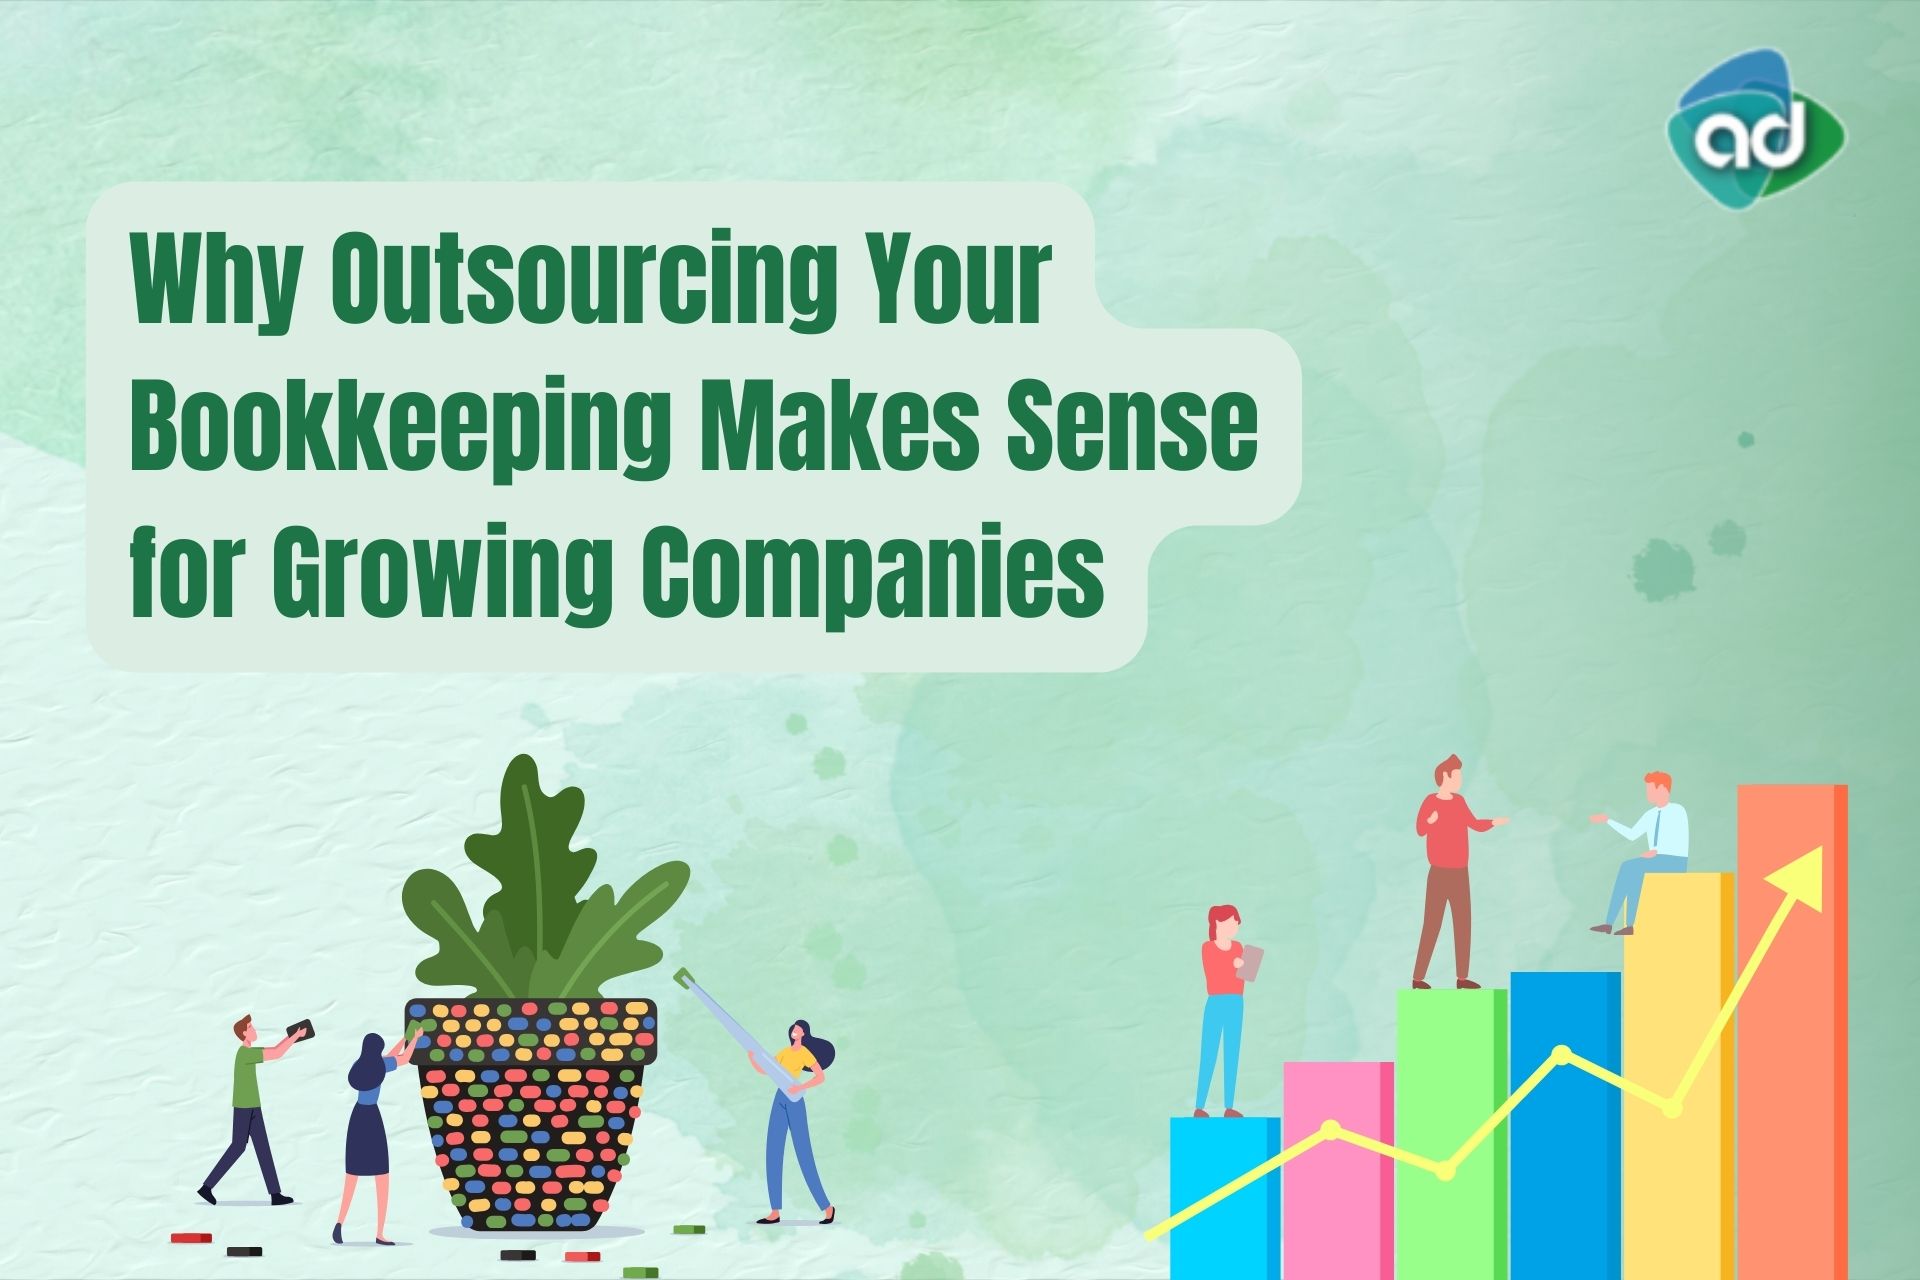 Why Outsourcing Your Bookkeeping Makes Sense for Growing Companies